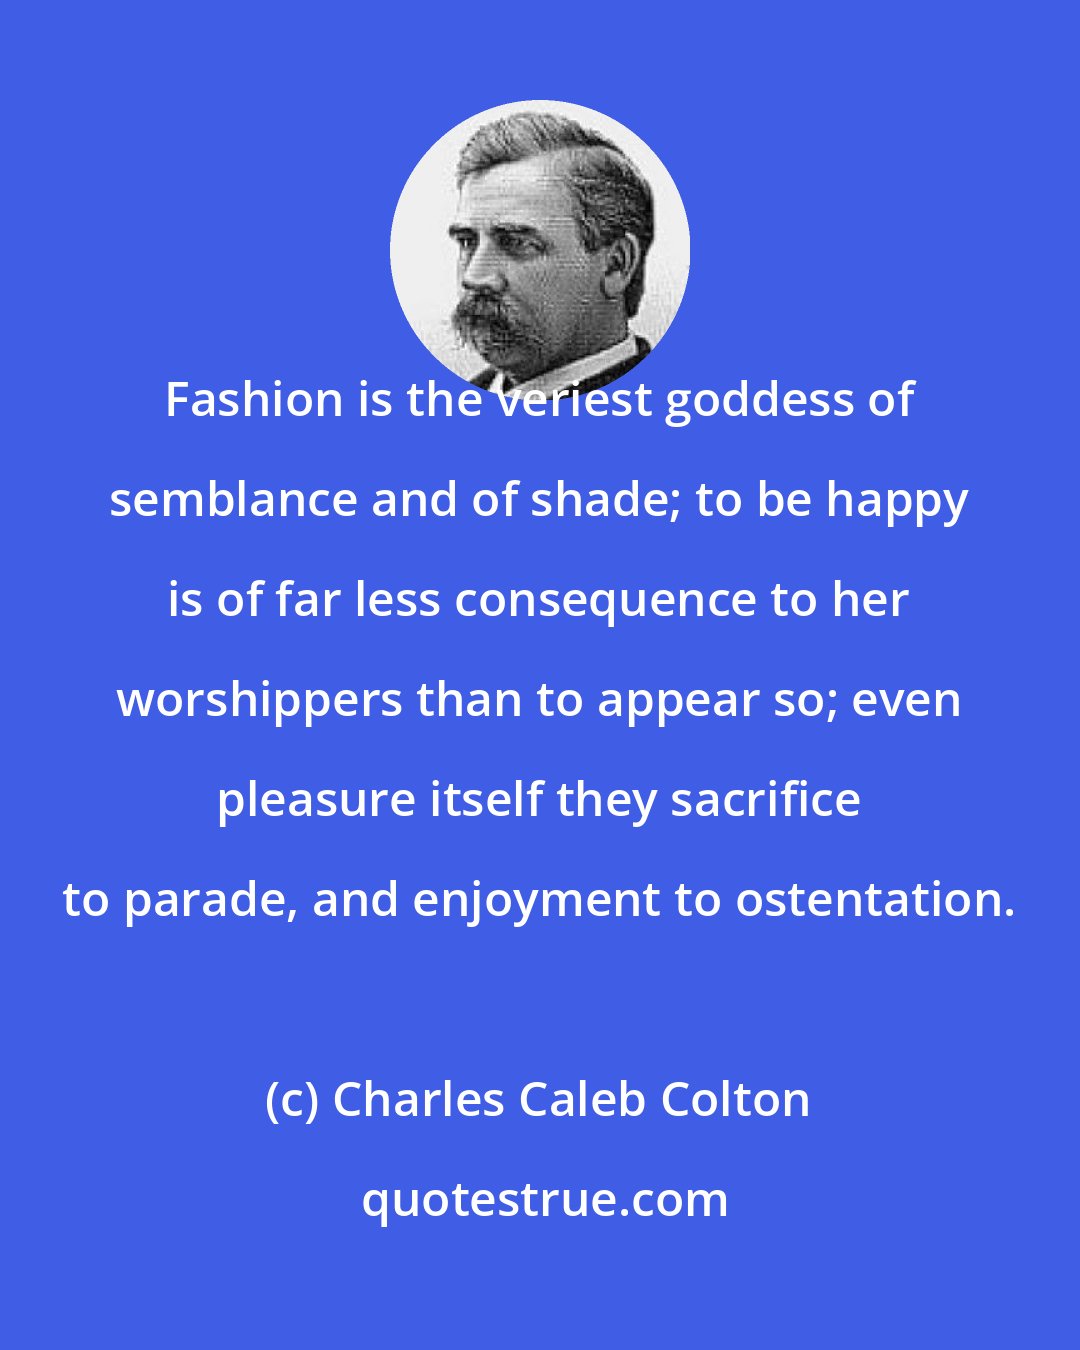 Charles Caleb Colton: Fashion is the veriest goddess of semblance and of shade; to be happy is of far less consequence to her worshippers than to appear so; even pleasure itself they sacrifice to parade, and enjoyment to ostentation.